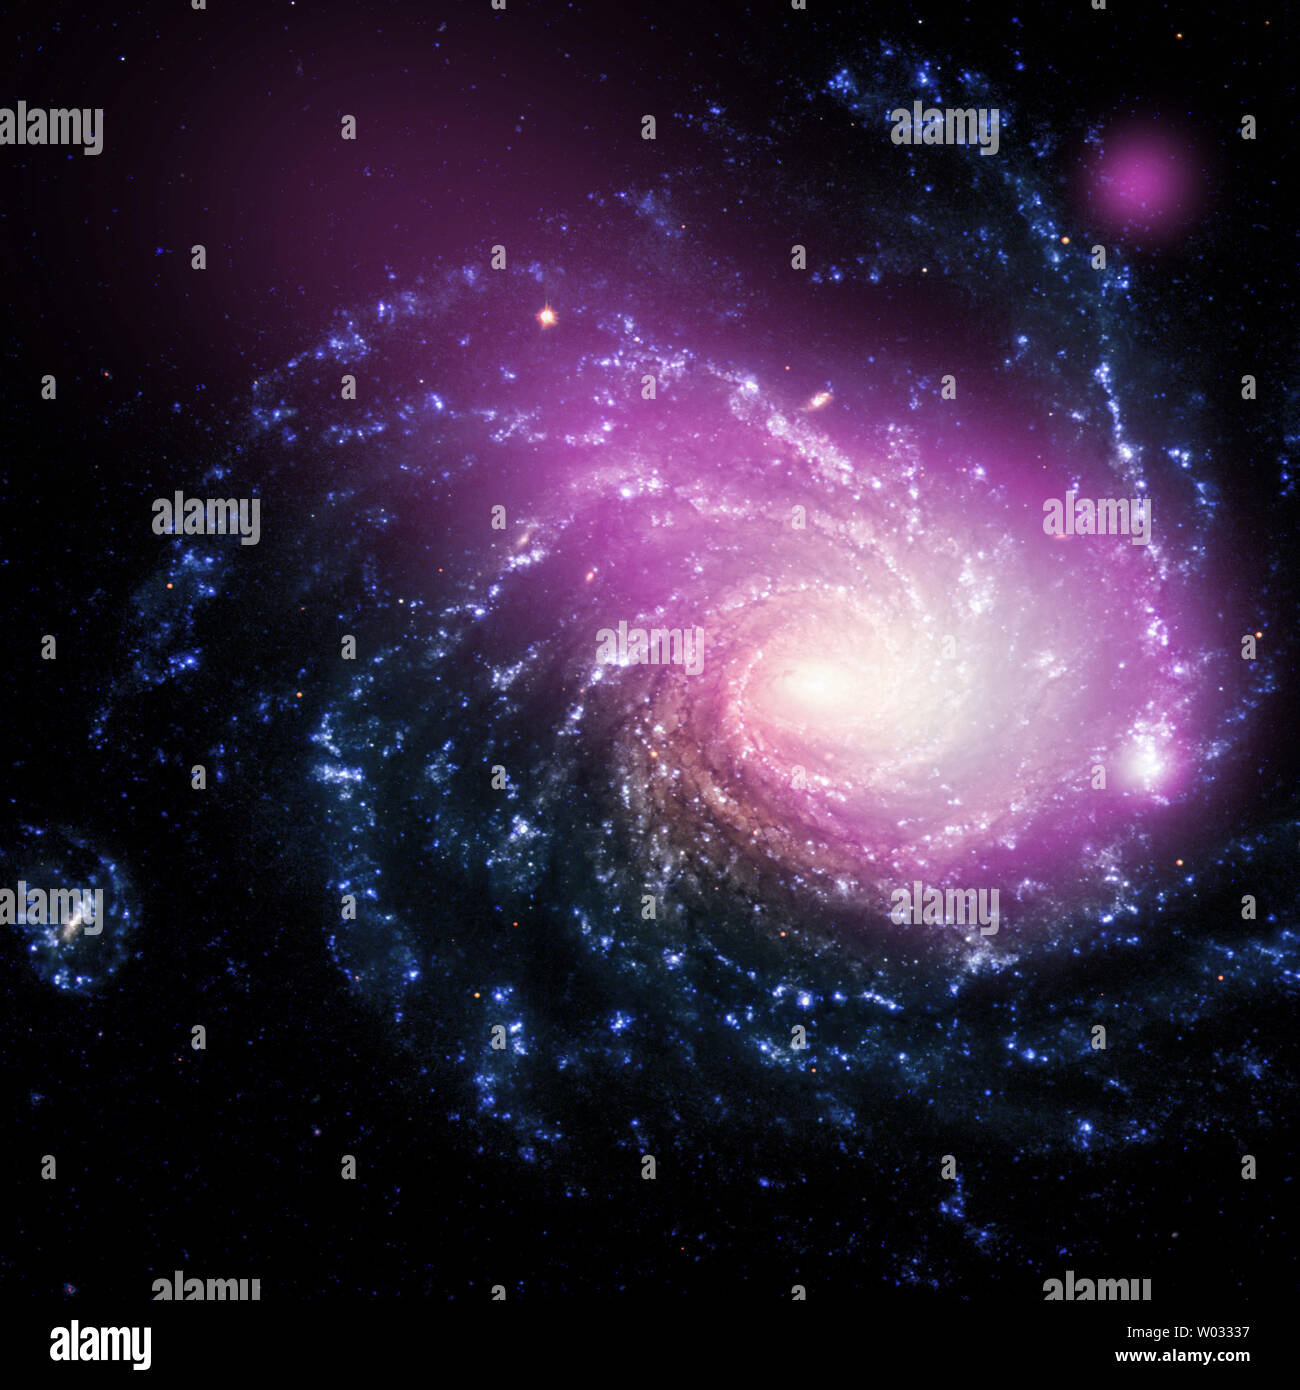 Observations with NASA's Chandra X-ray Observatory have revealed a massive cloud of multimillion-degree gas in a galaxy about 60 million light years from Earth.   The hot gas cloud is likely caused by a collision between a dwarf galaxy and a much larger galaxy called NGC 1232.  If confirmed, this discovery would mark the first time such a collision has been detected only in X-rays, and could have implications for understanding how galaxies grow through similar collisions. An image combining X-rays and optical light shows the scene of this collision. The impact between the dwarf galaxy and the Stock Photo